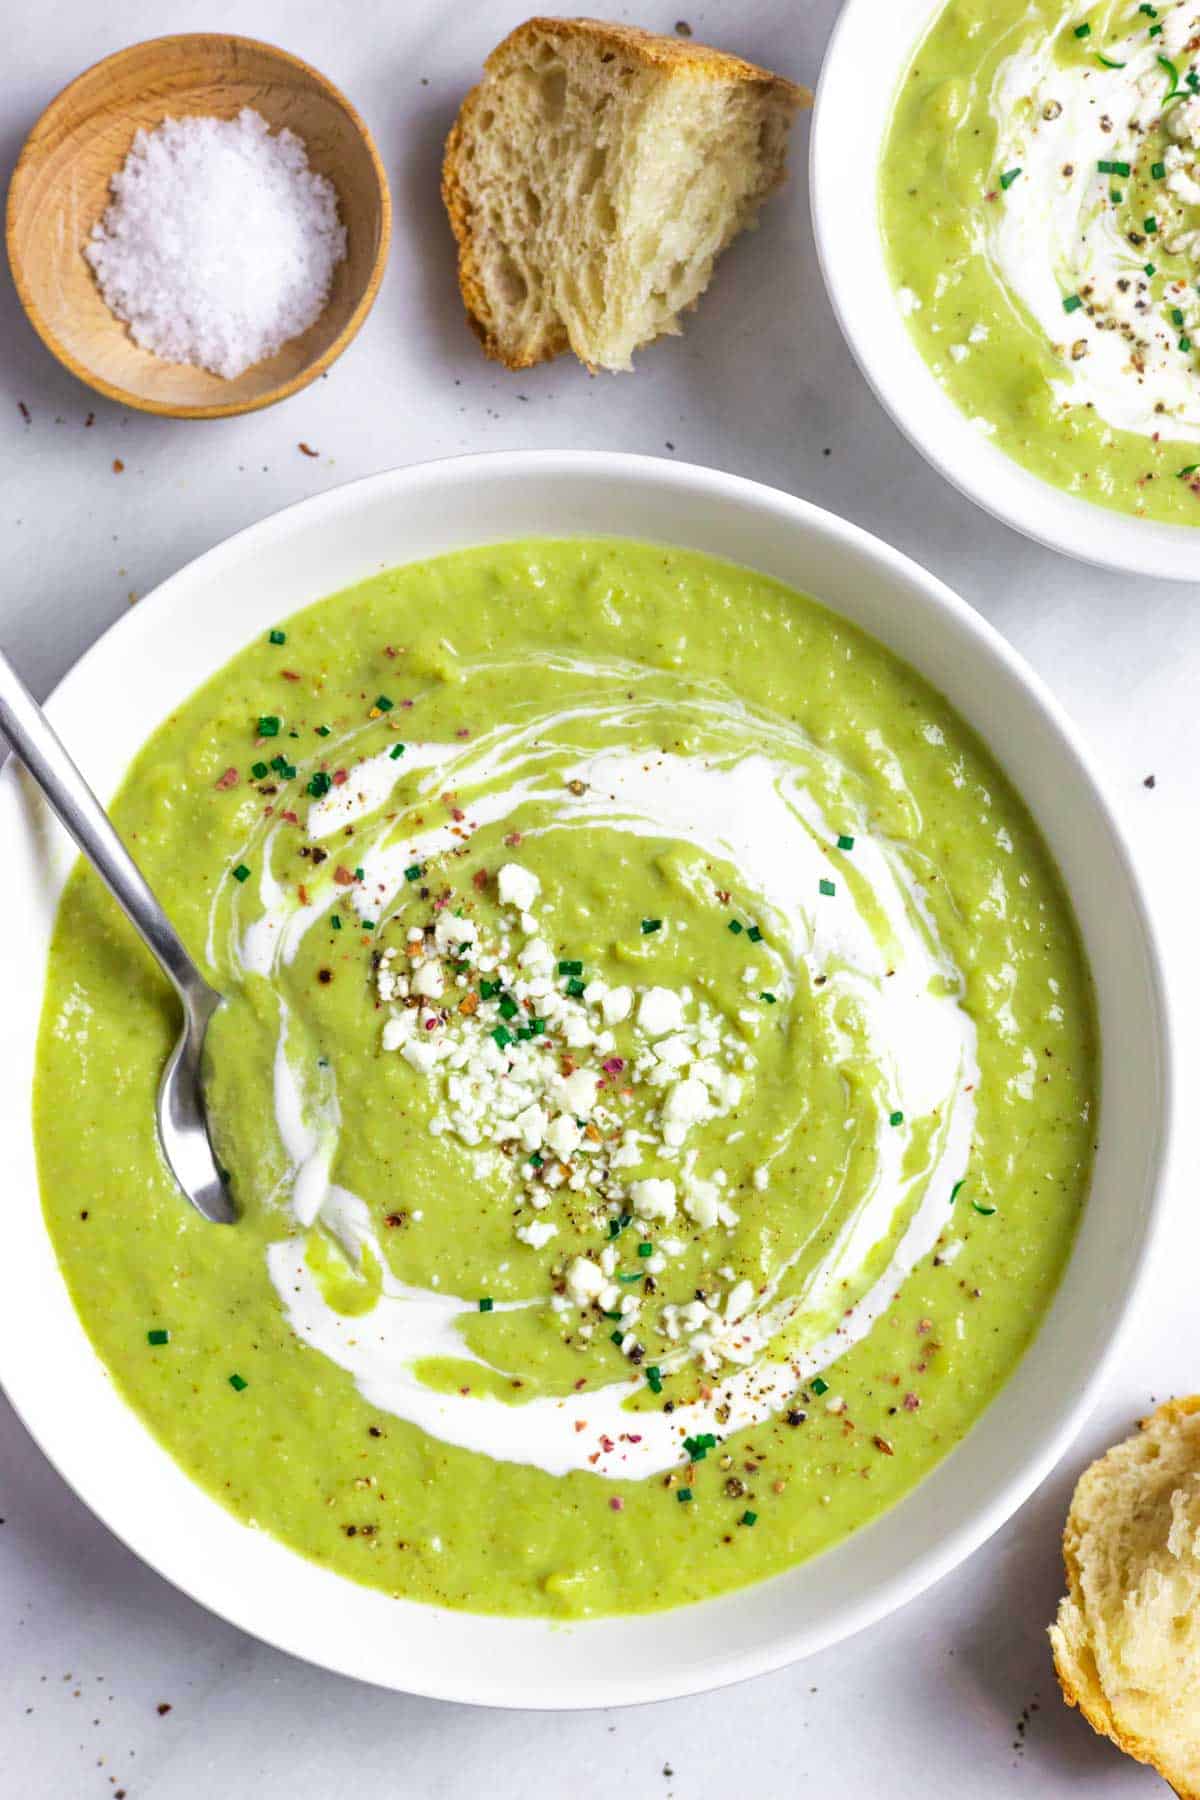 White bowl of broccoli almond soup with a spoon, sour cream, cheese and herb topping.